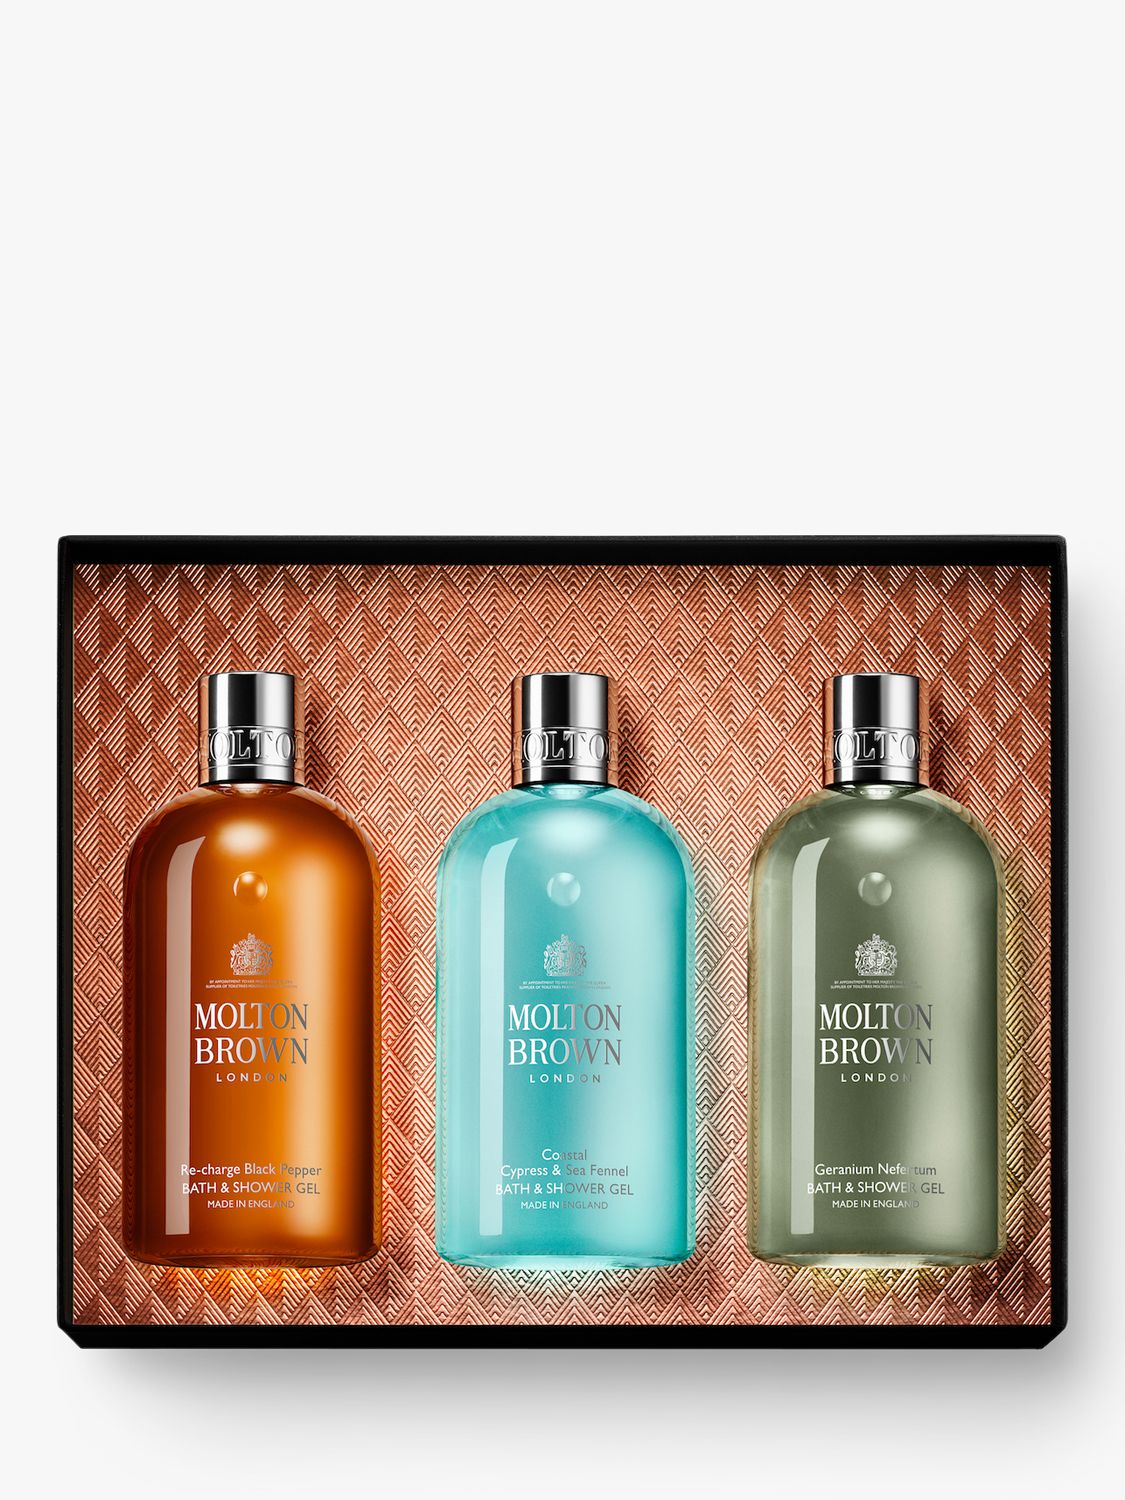 Molton Brown Spicy & Aromatic Bodycare Gift Set at John Lewis & Partners